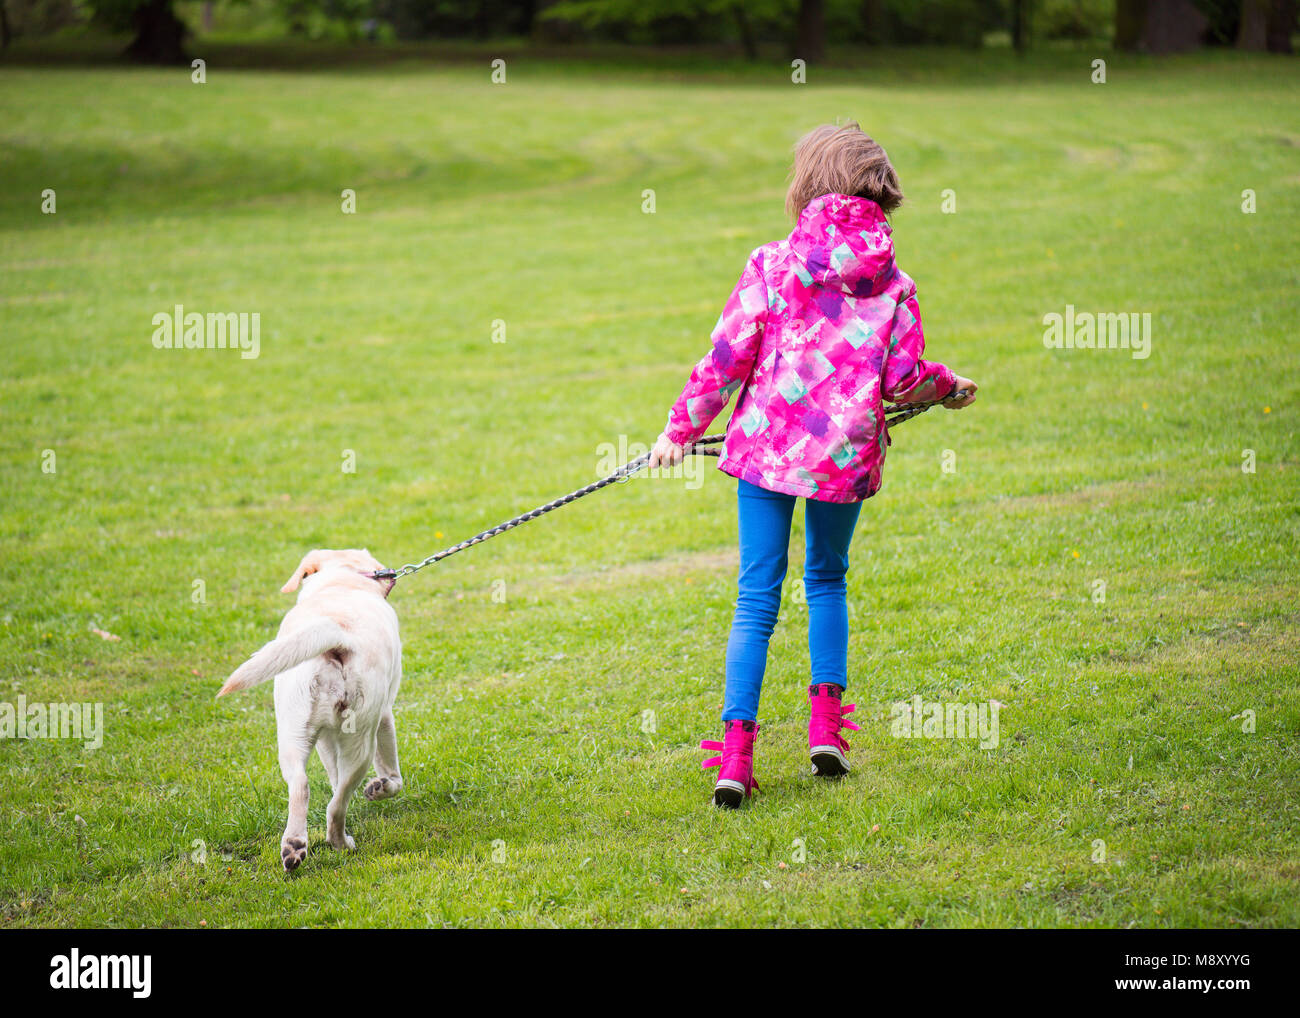 Girl with dog in park Stock Photo